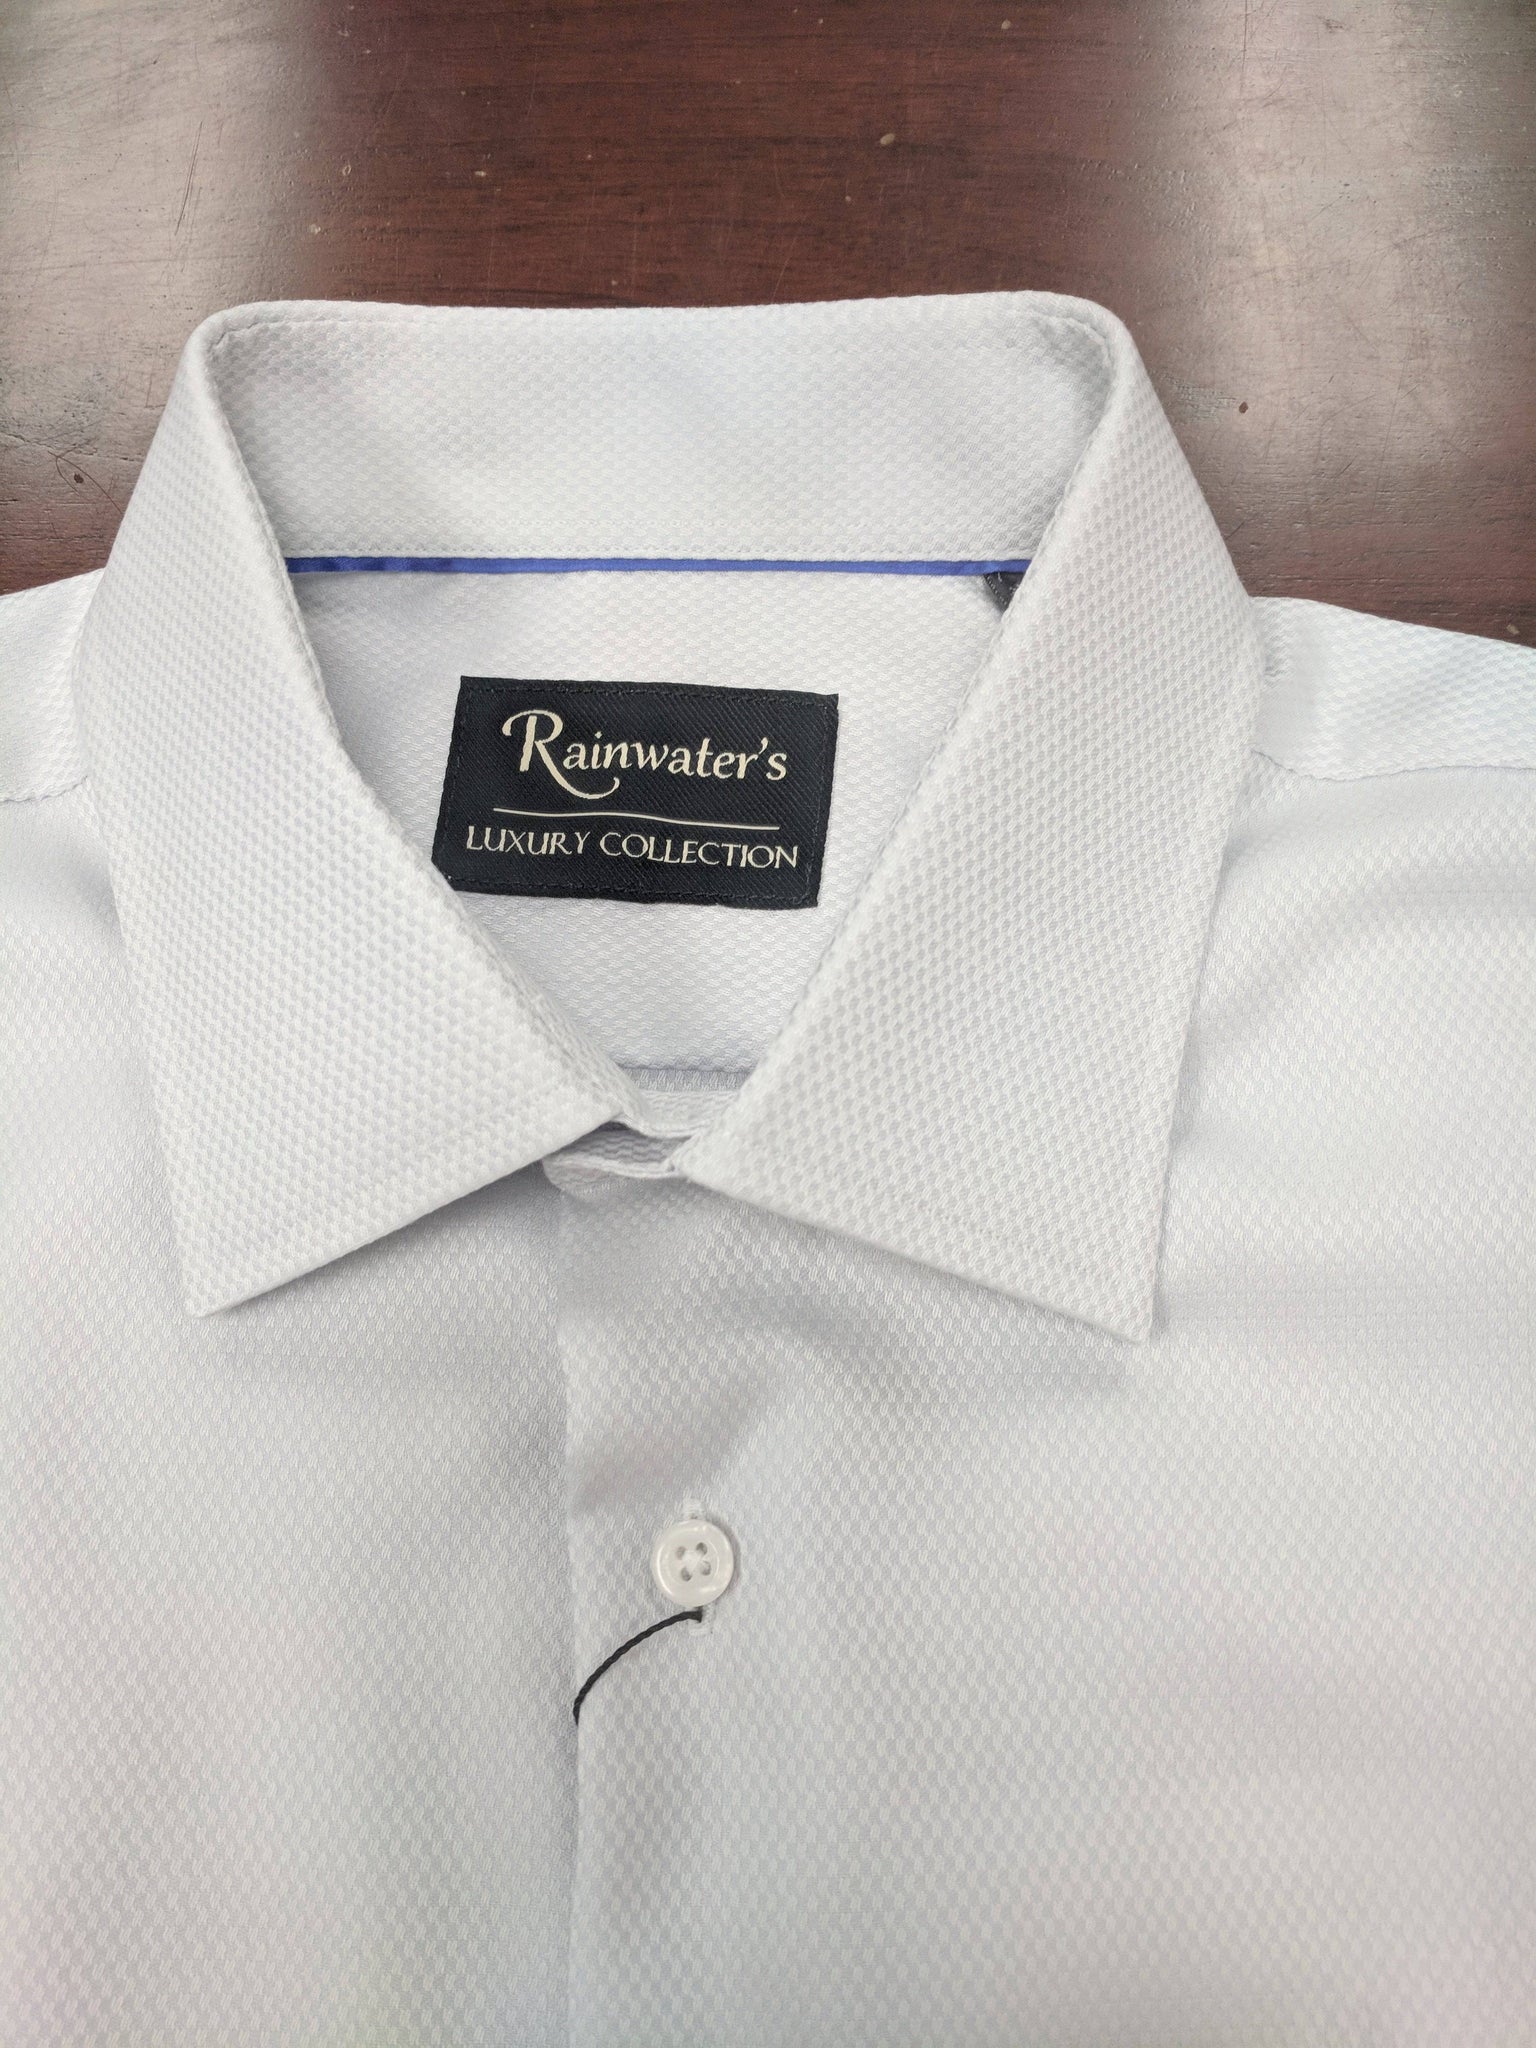 Rainwater's Silver Royal Oxford 100% Cotton, Classic Fit, Button Cuff, Spread Collar - Dress Shirt - Rainwater's Men's Clothing and Tuxedo Rental